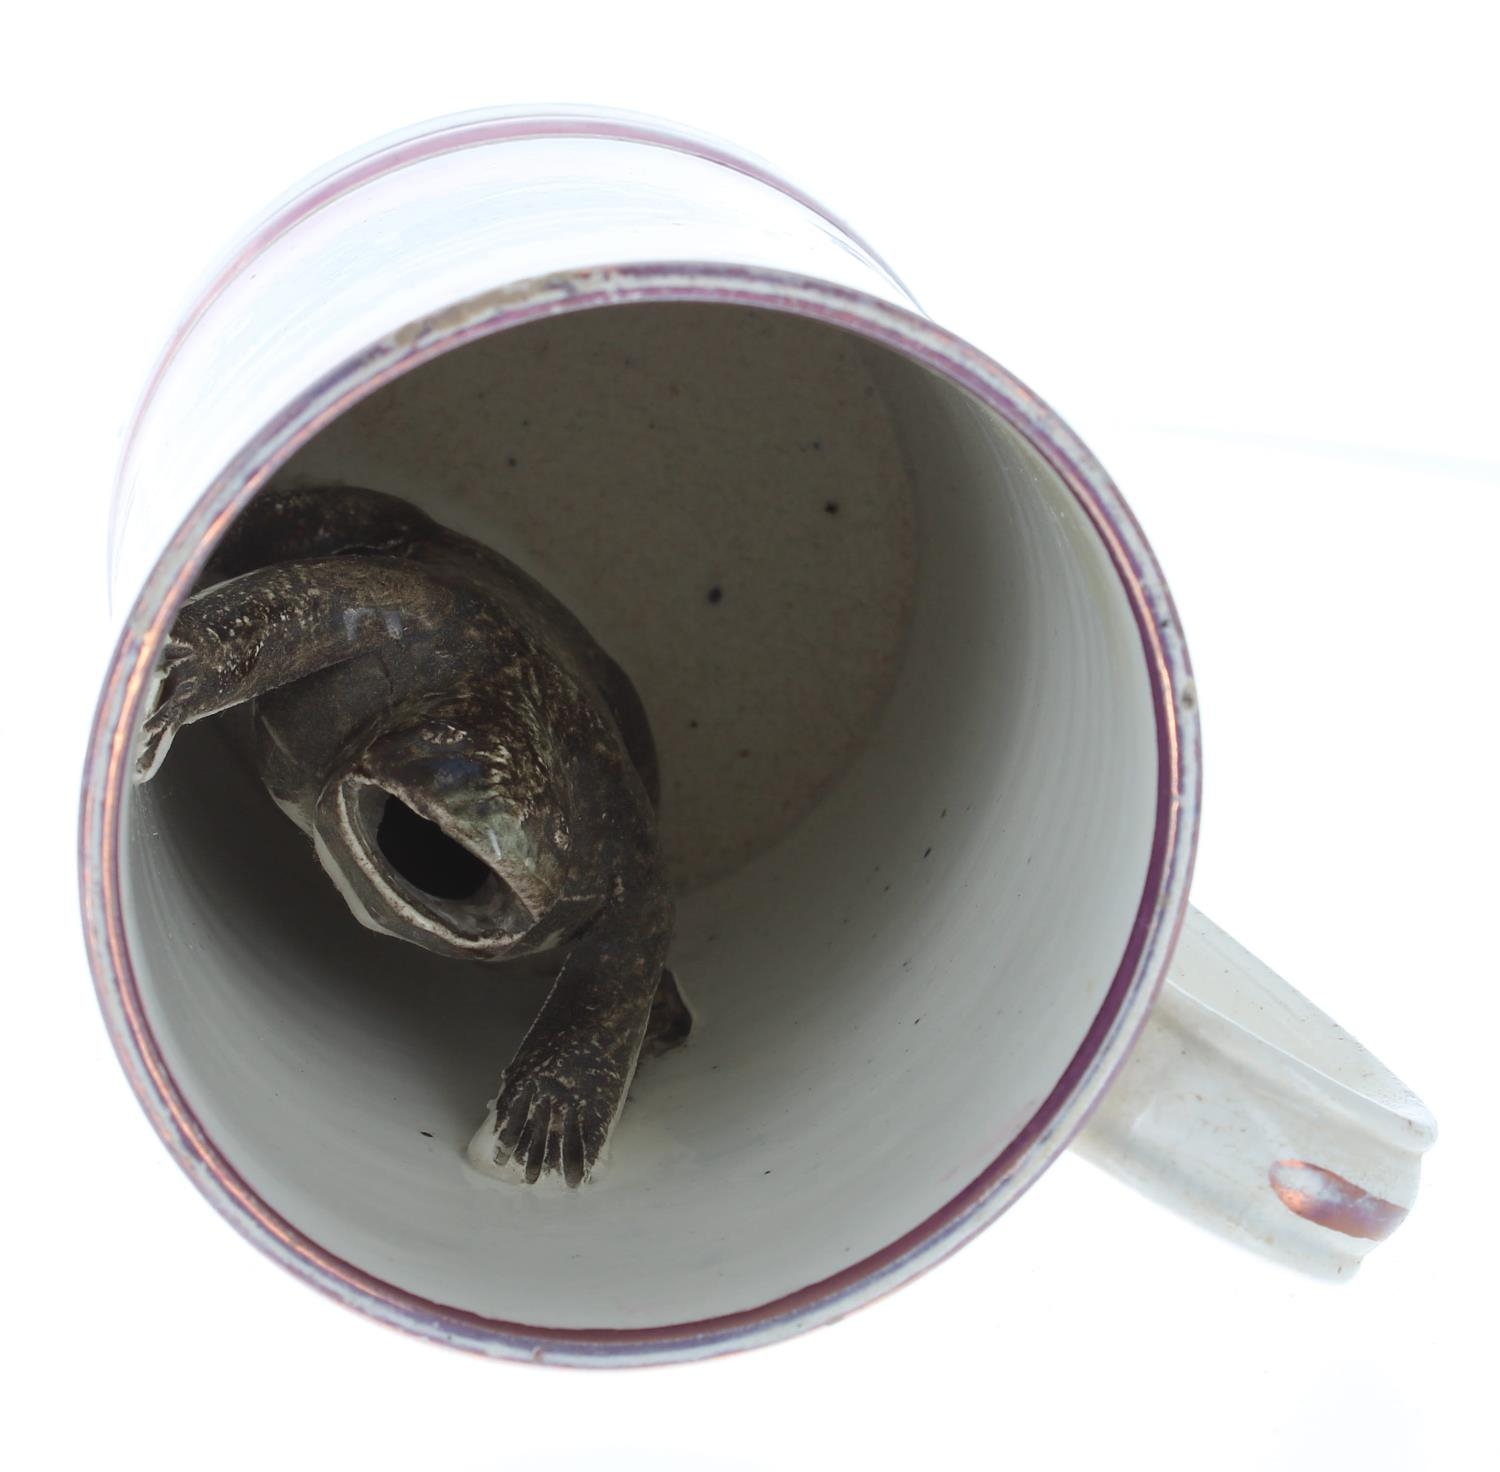 19th century Sunderland lustre frog tankard, transfer printed with a west view of the cast iron - Image 2 of 3